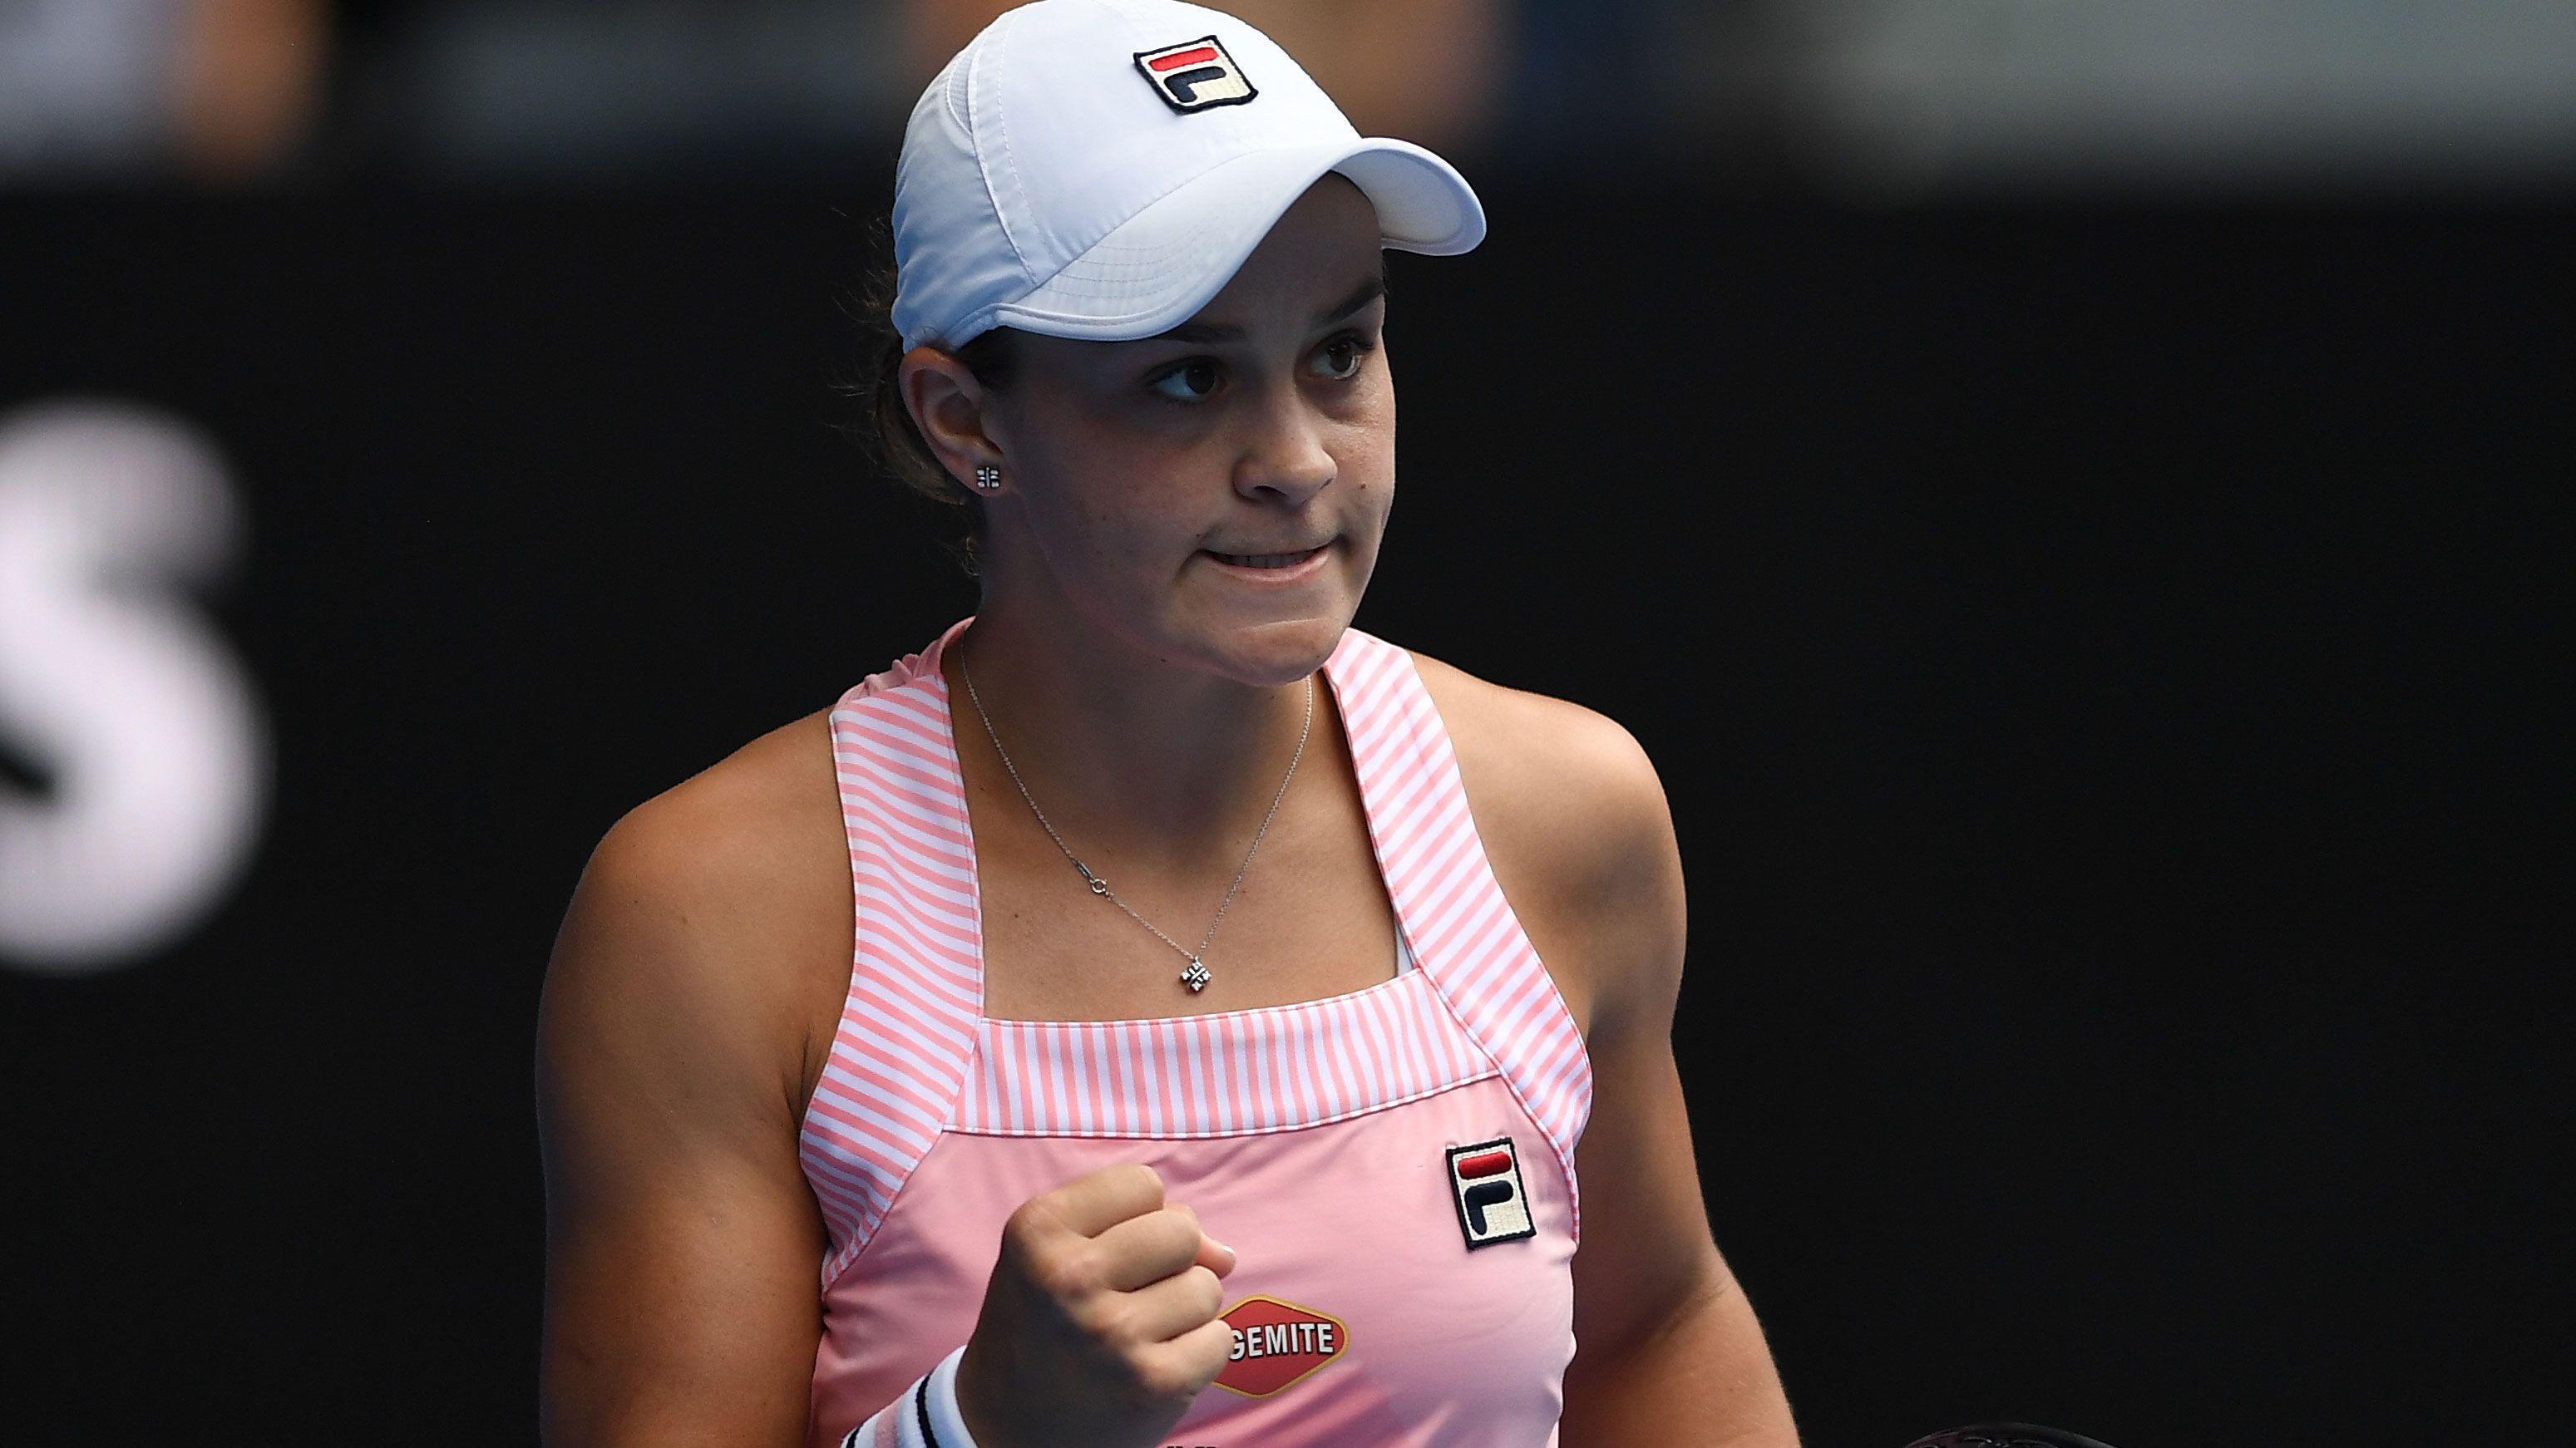 Ash Barty compared with Roger Federer in convincing second round Australian Open win